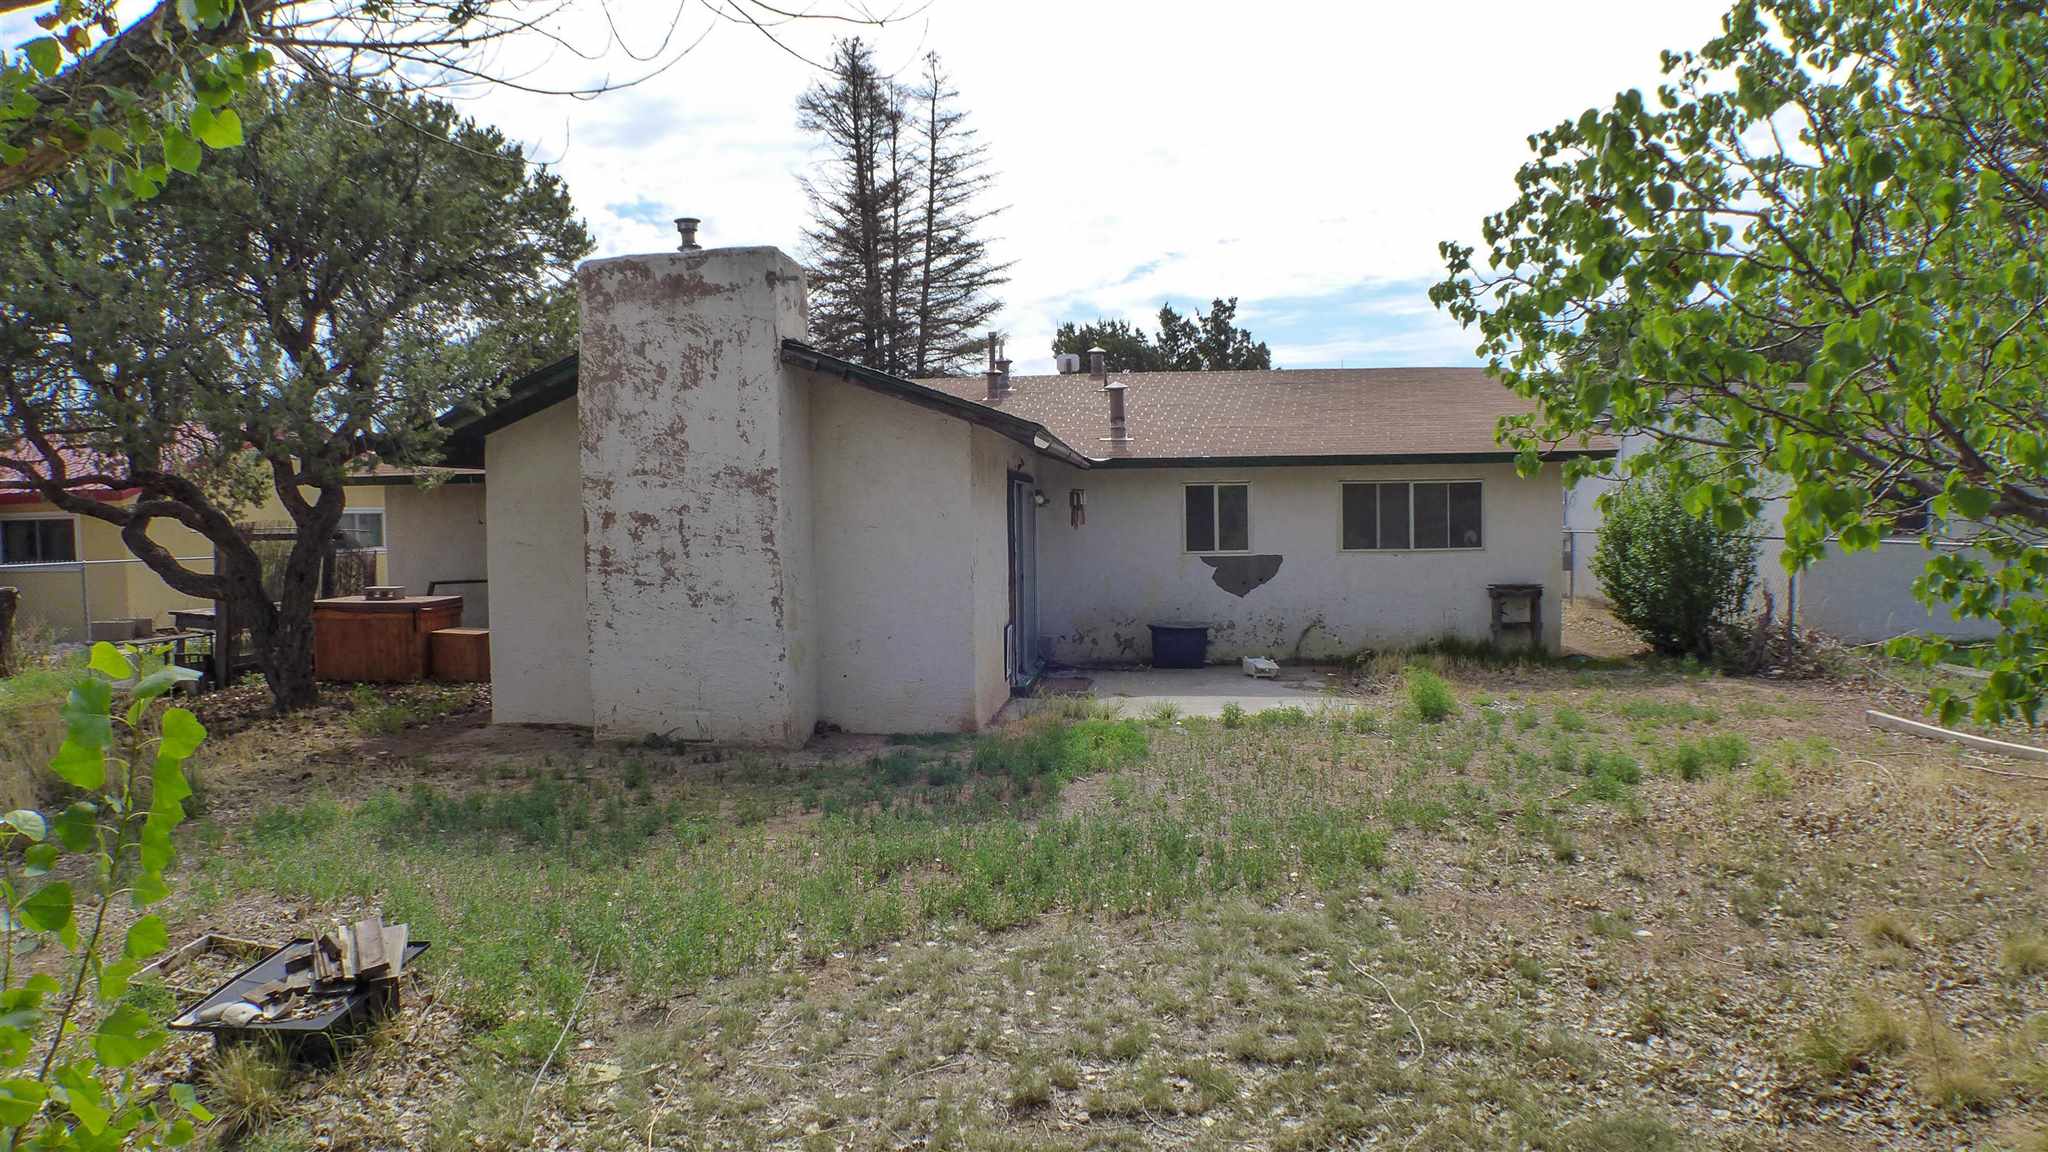 511 Paige, Los Alamos, New Mexico 87544, 3 Bedrooms Bedrooms, ,1 BathroomBathrooms,Residential,For Sale,511 Paige,202103157